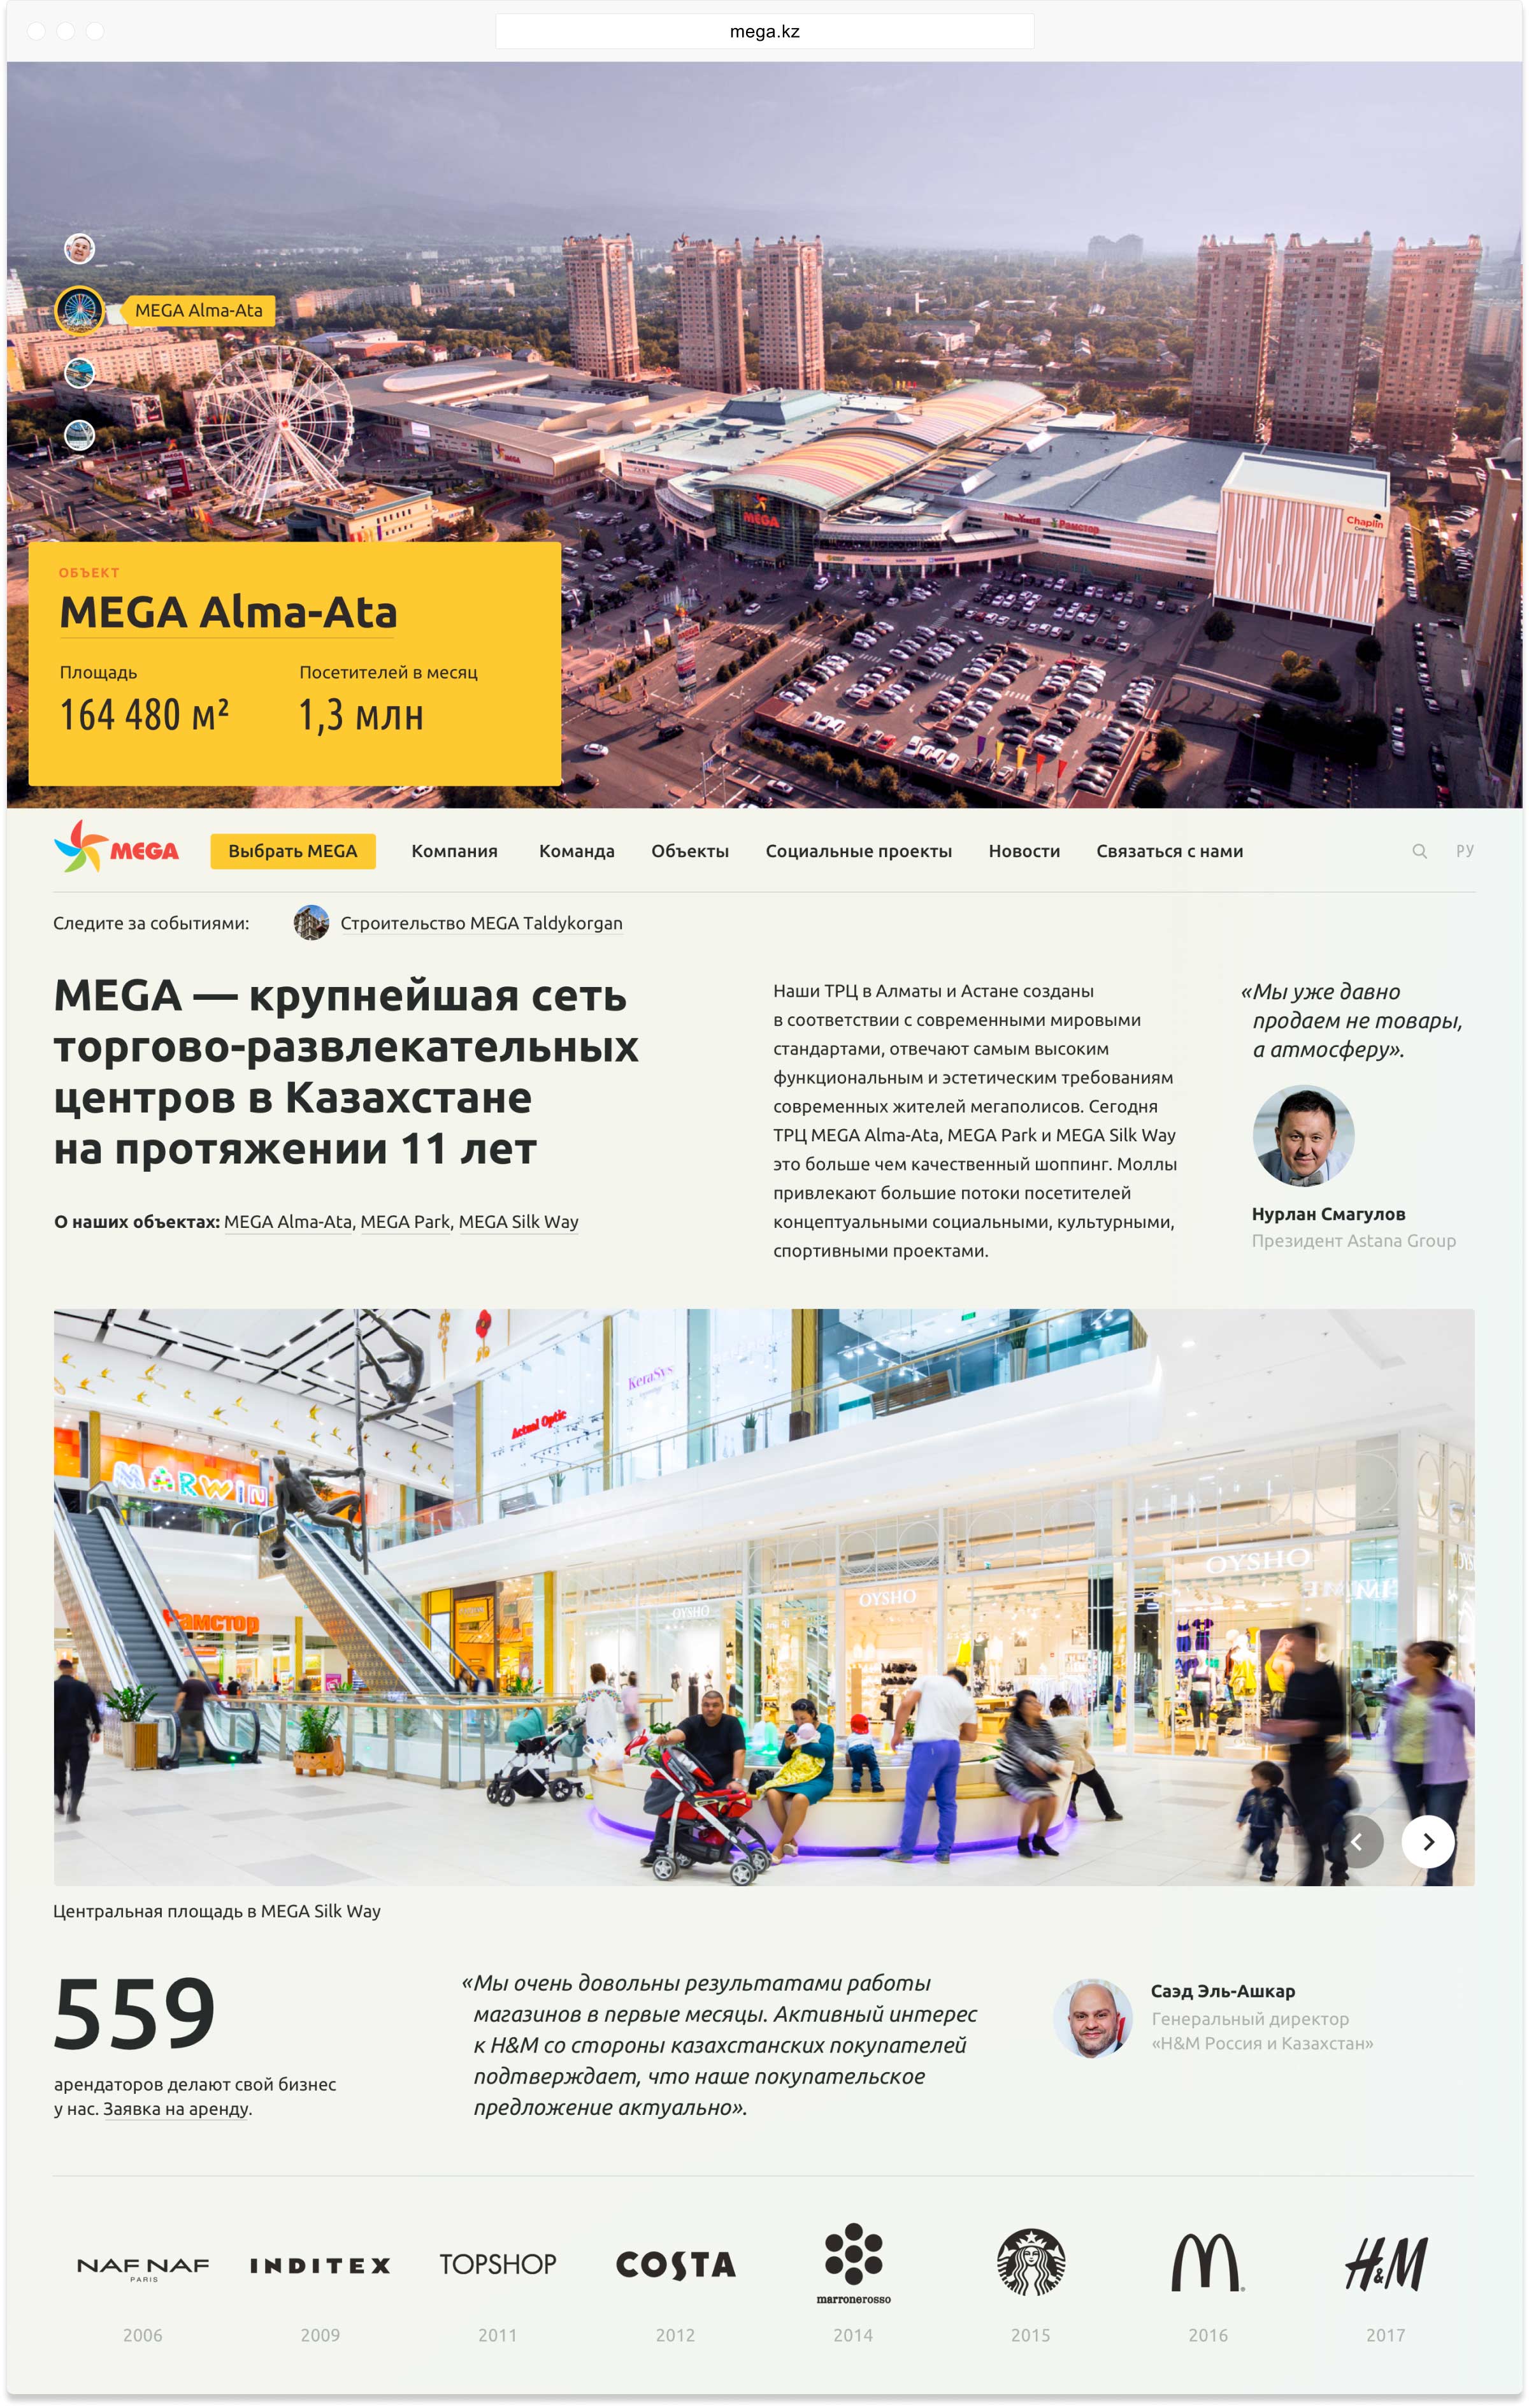 On homepage — general information about Megas